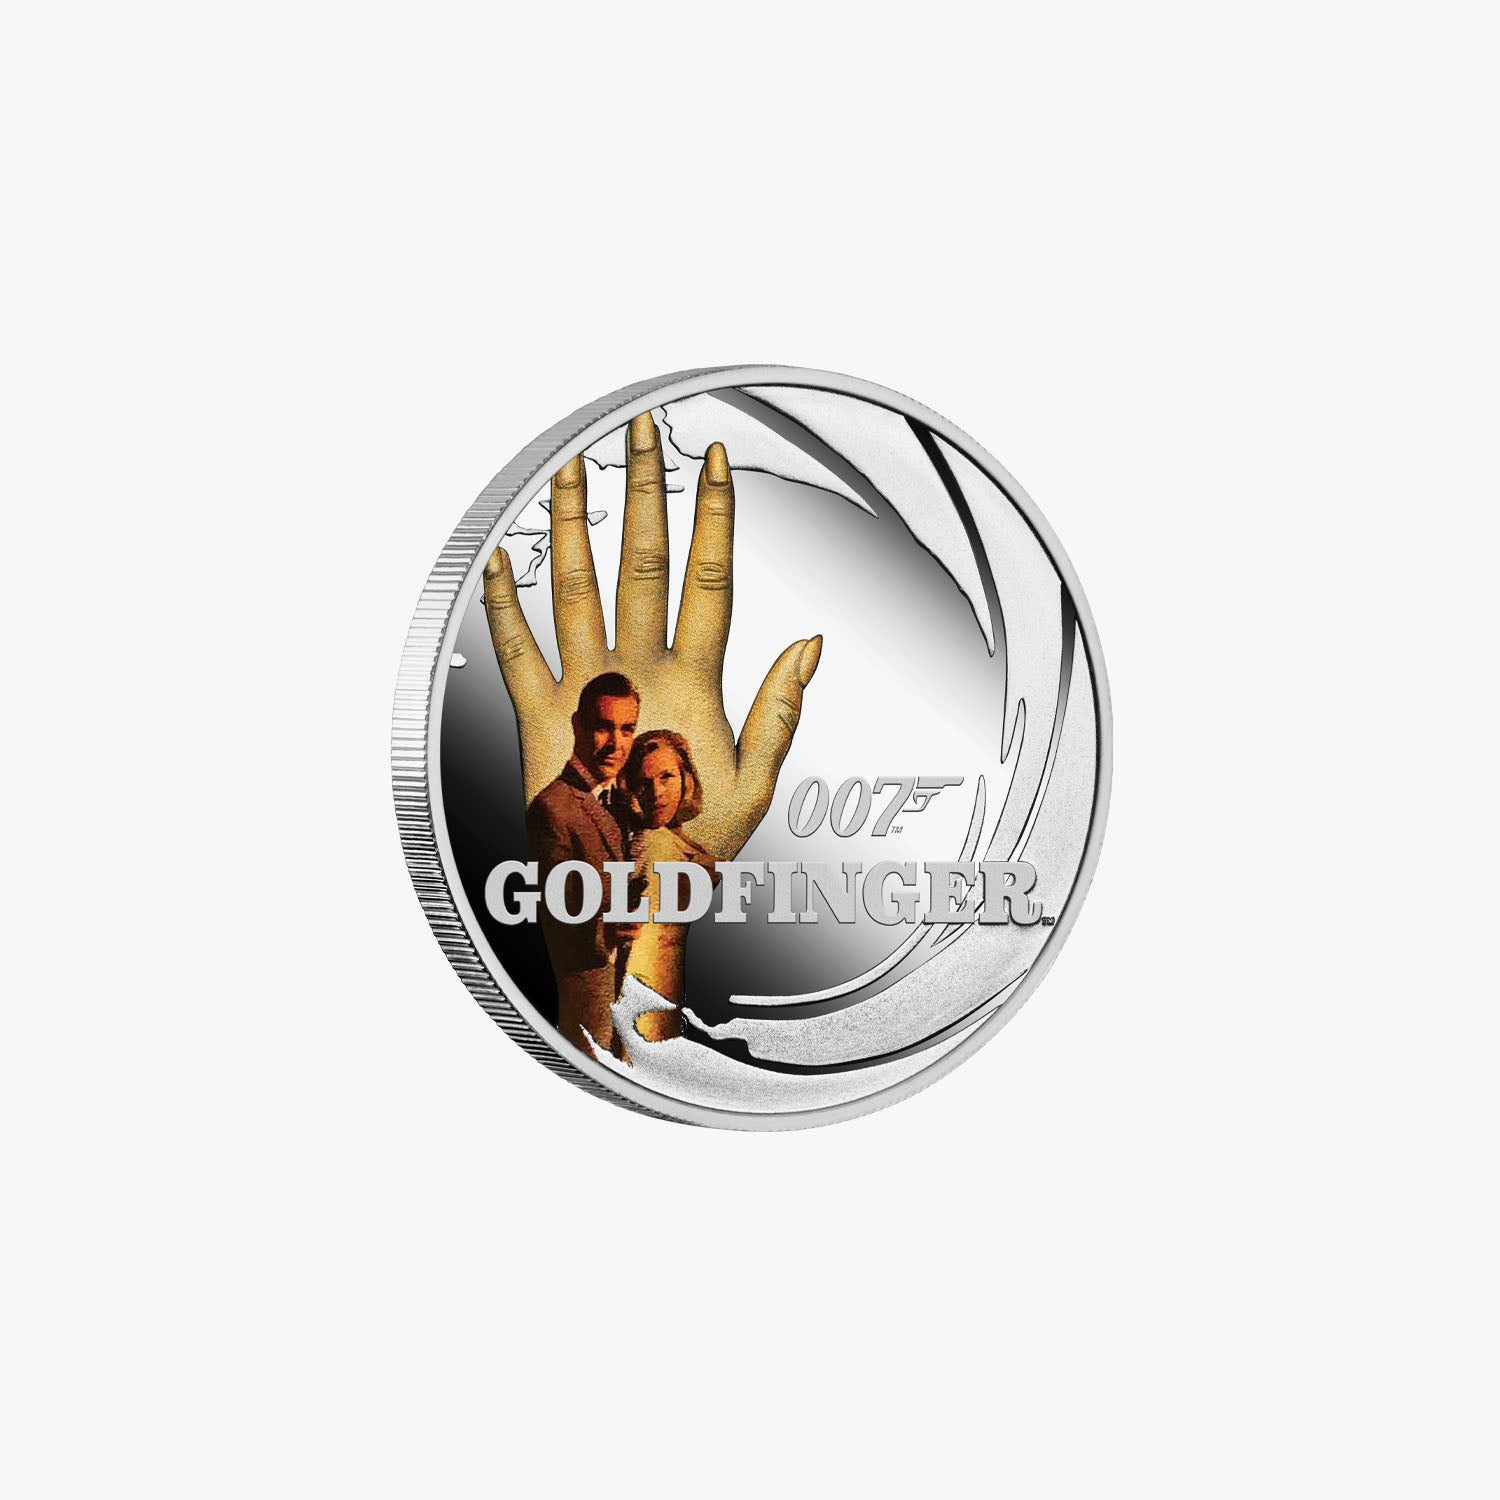 James Bond - Goldfinger Solid Silver Movie Coin